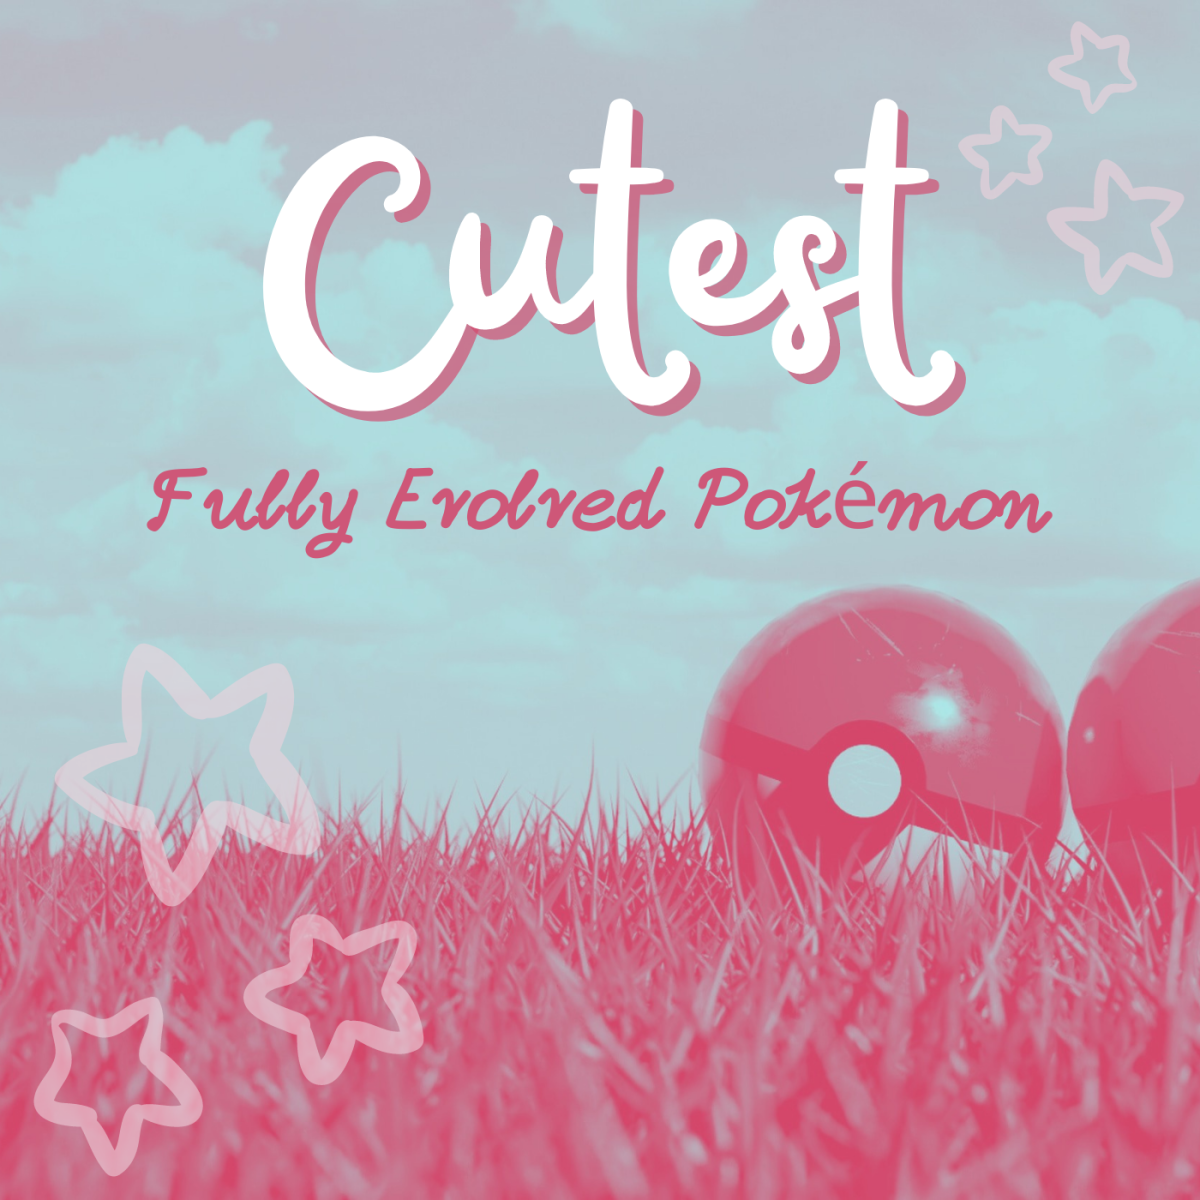 Pokémon in their final form can still be cute! Let's take a look at some of the prettiest and most powerful Pokémon.